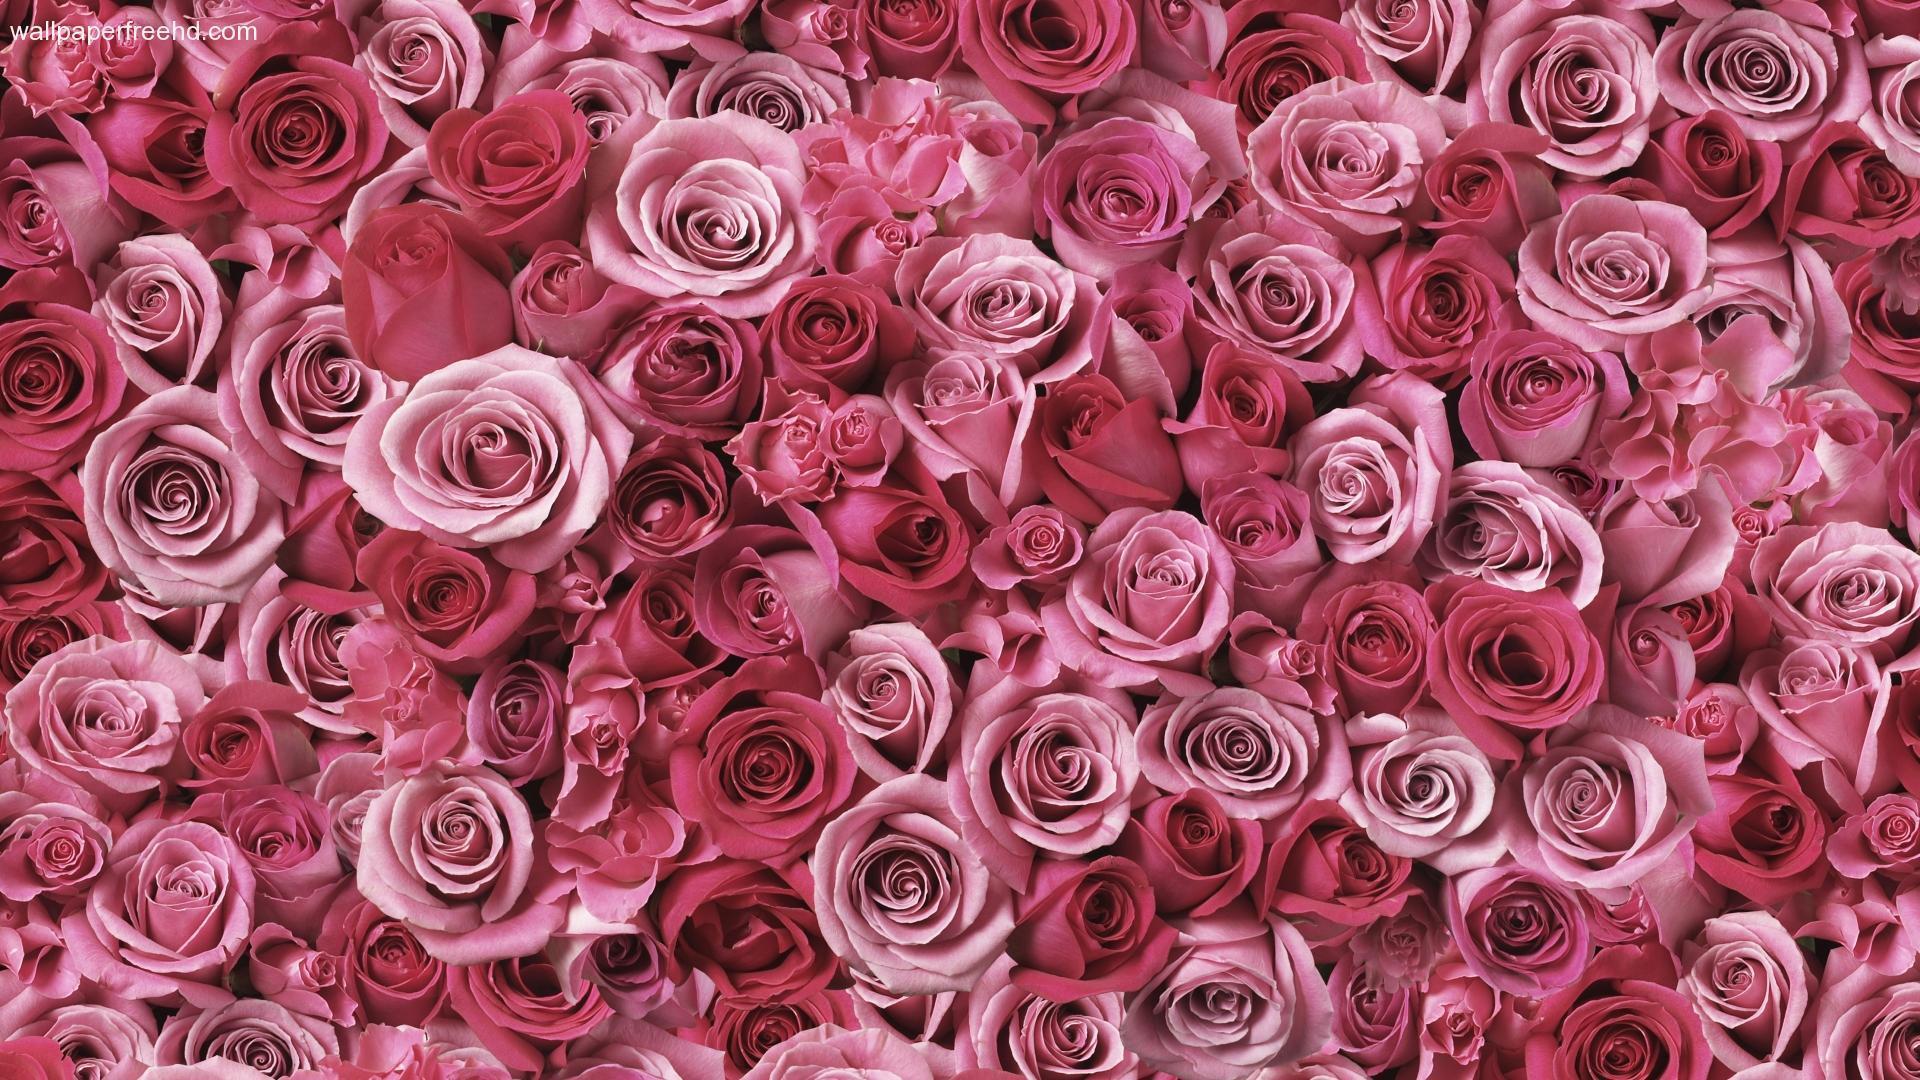 A close up of pink roses - Rose gold, roses